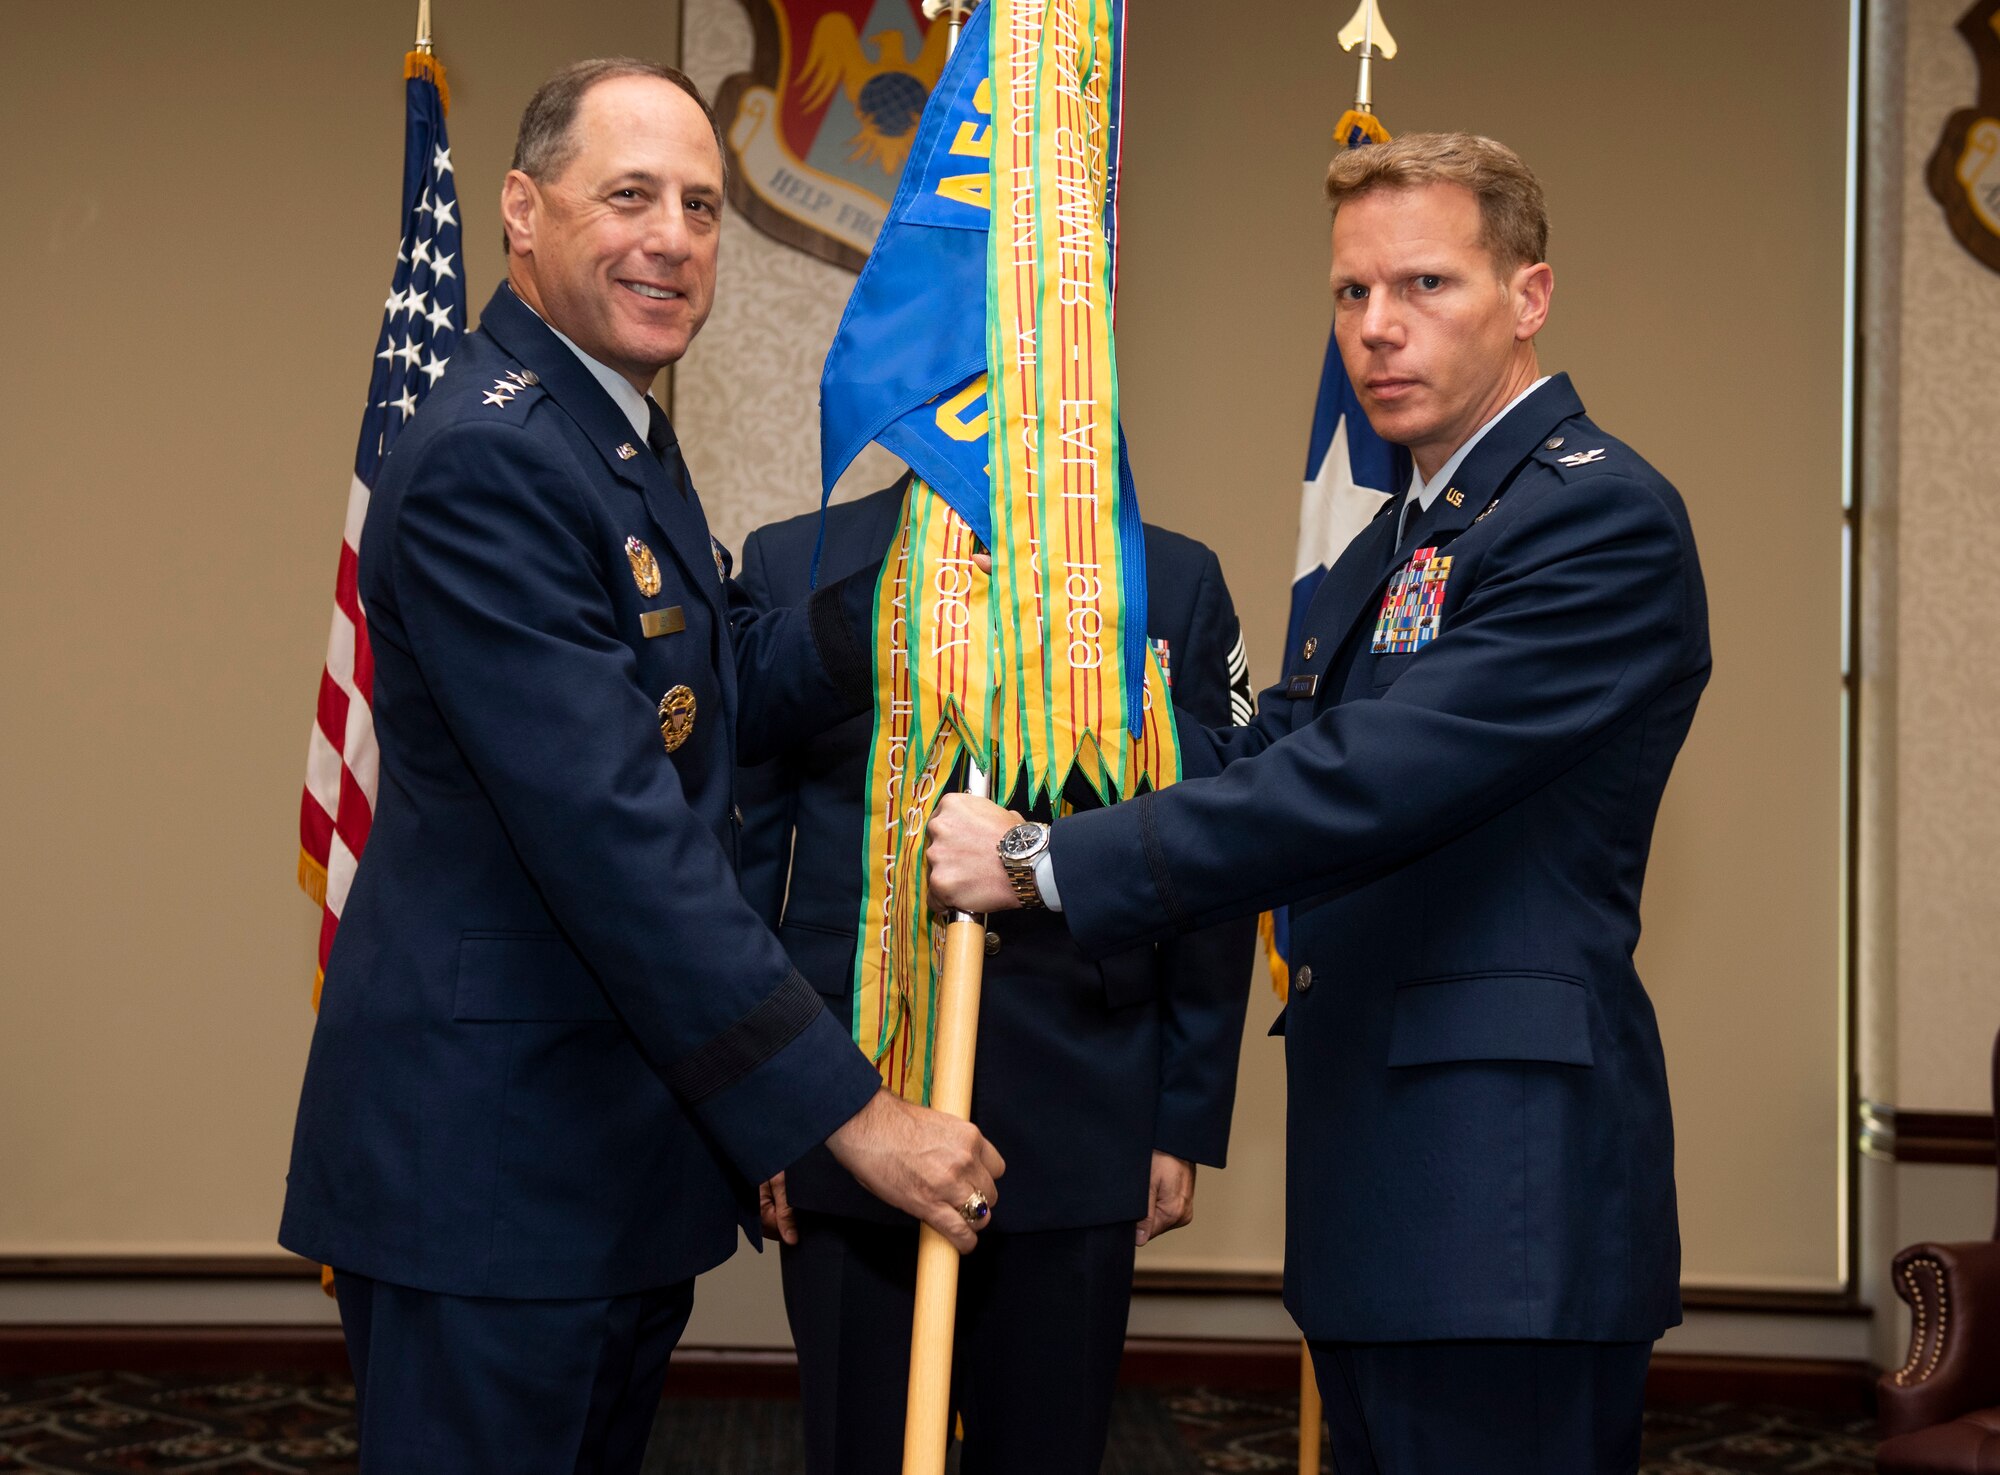 Lt. Gen. Lee Levy II, Air Force Sustainment Command commander, presents the 635th Supply Chain Operations Wing guidon to Col. Robert Henderson